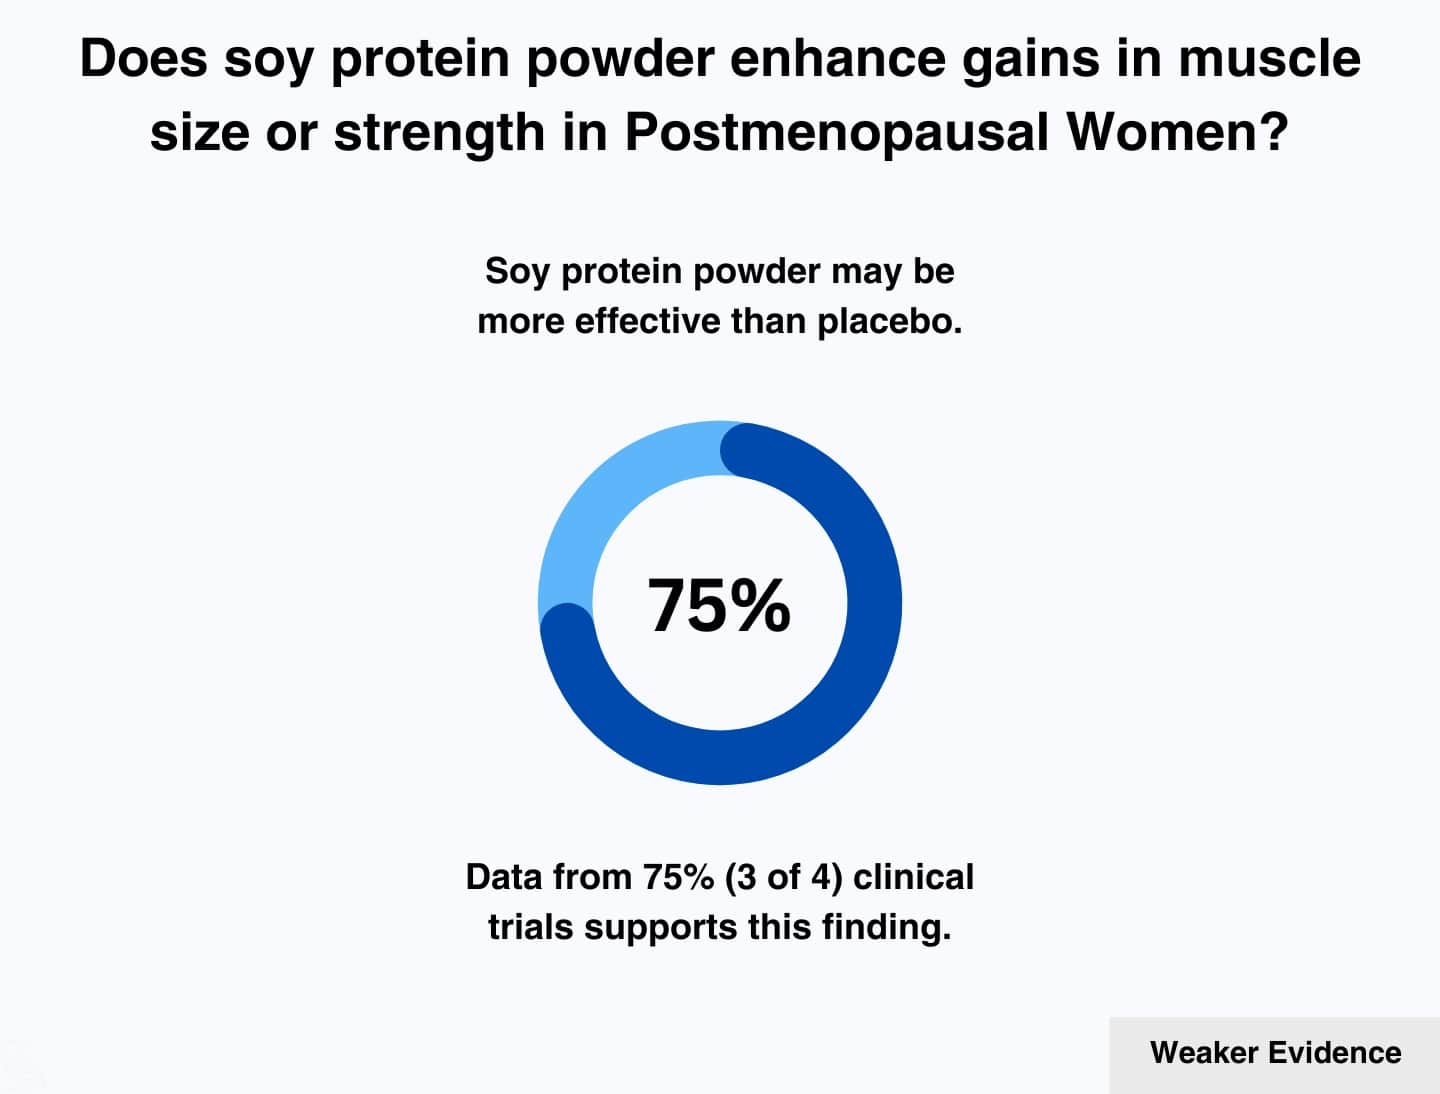 This image shows that the use of soy protein when bodybuilding, weighlifting, or engaging in another resistance exercise for building muscle, may be more effective than placebo in postmenopausal women.